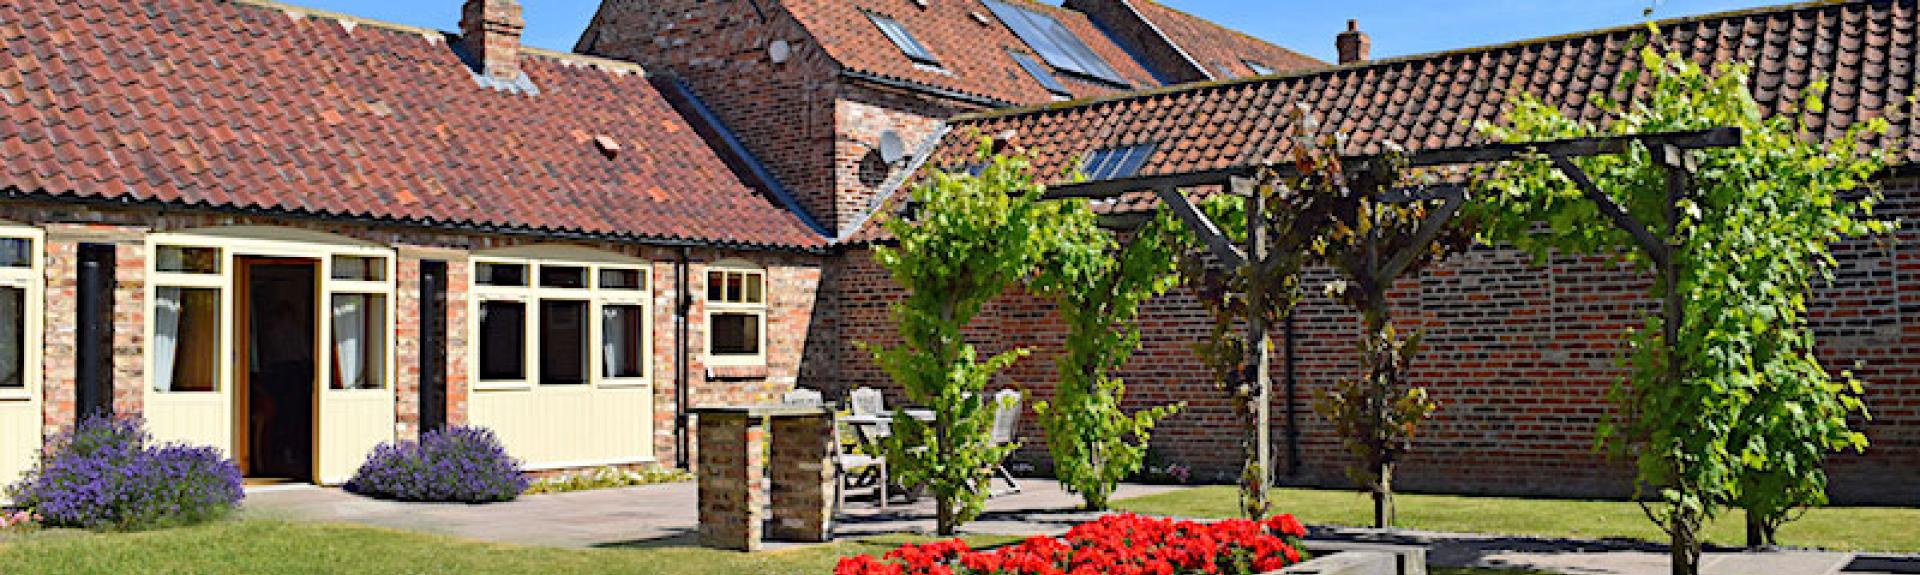 Barn conversion buildings overlooking a grass courtyard with a raised flower bed.